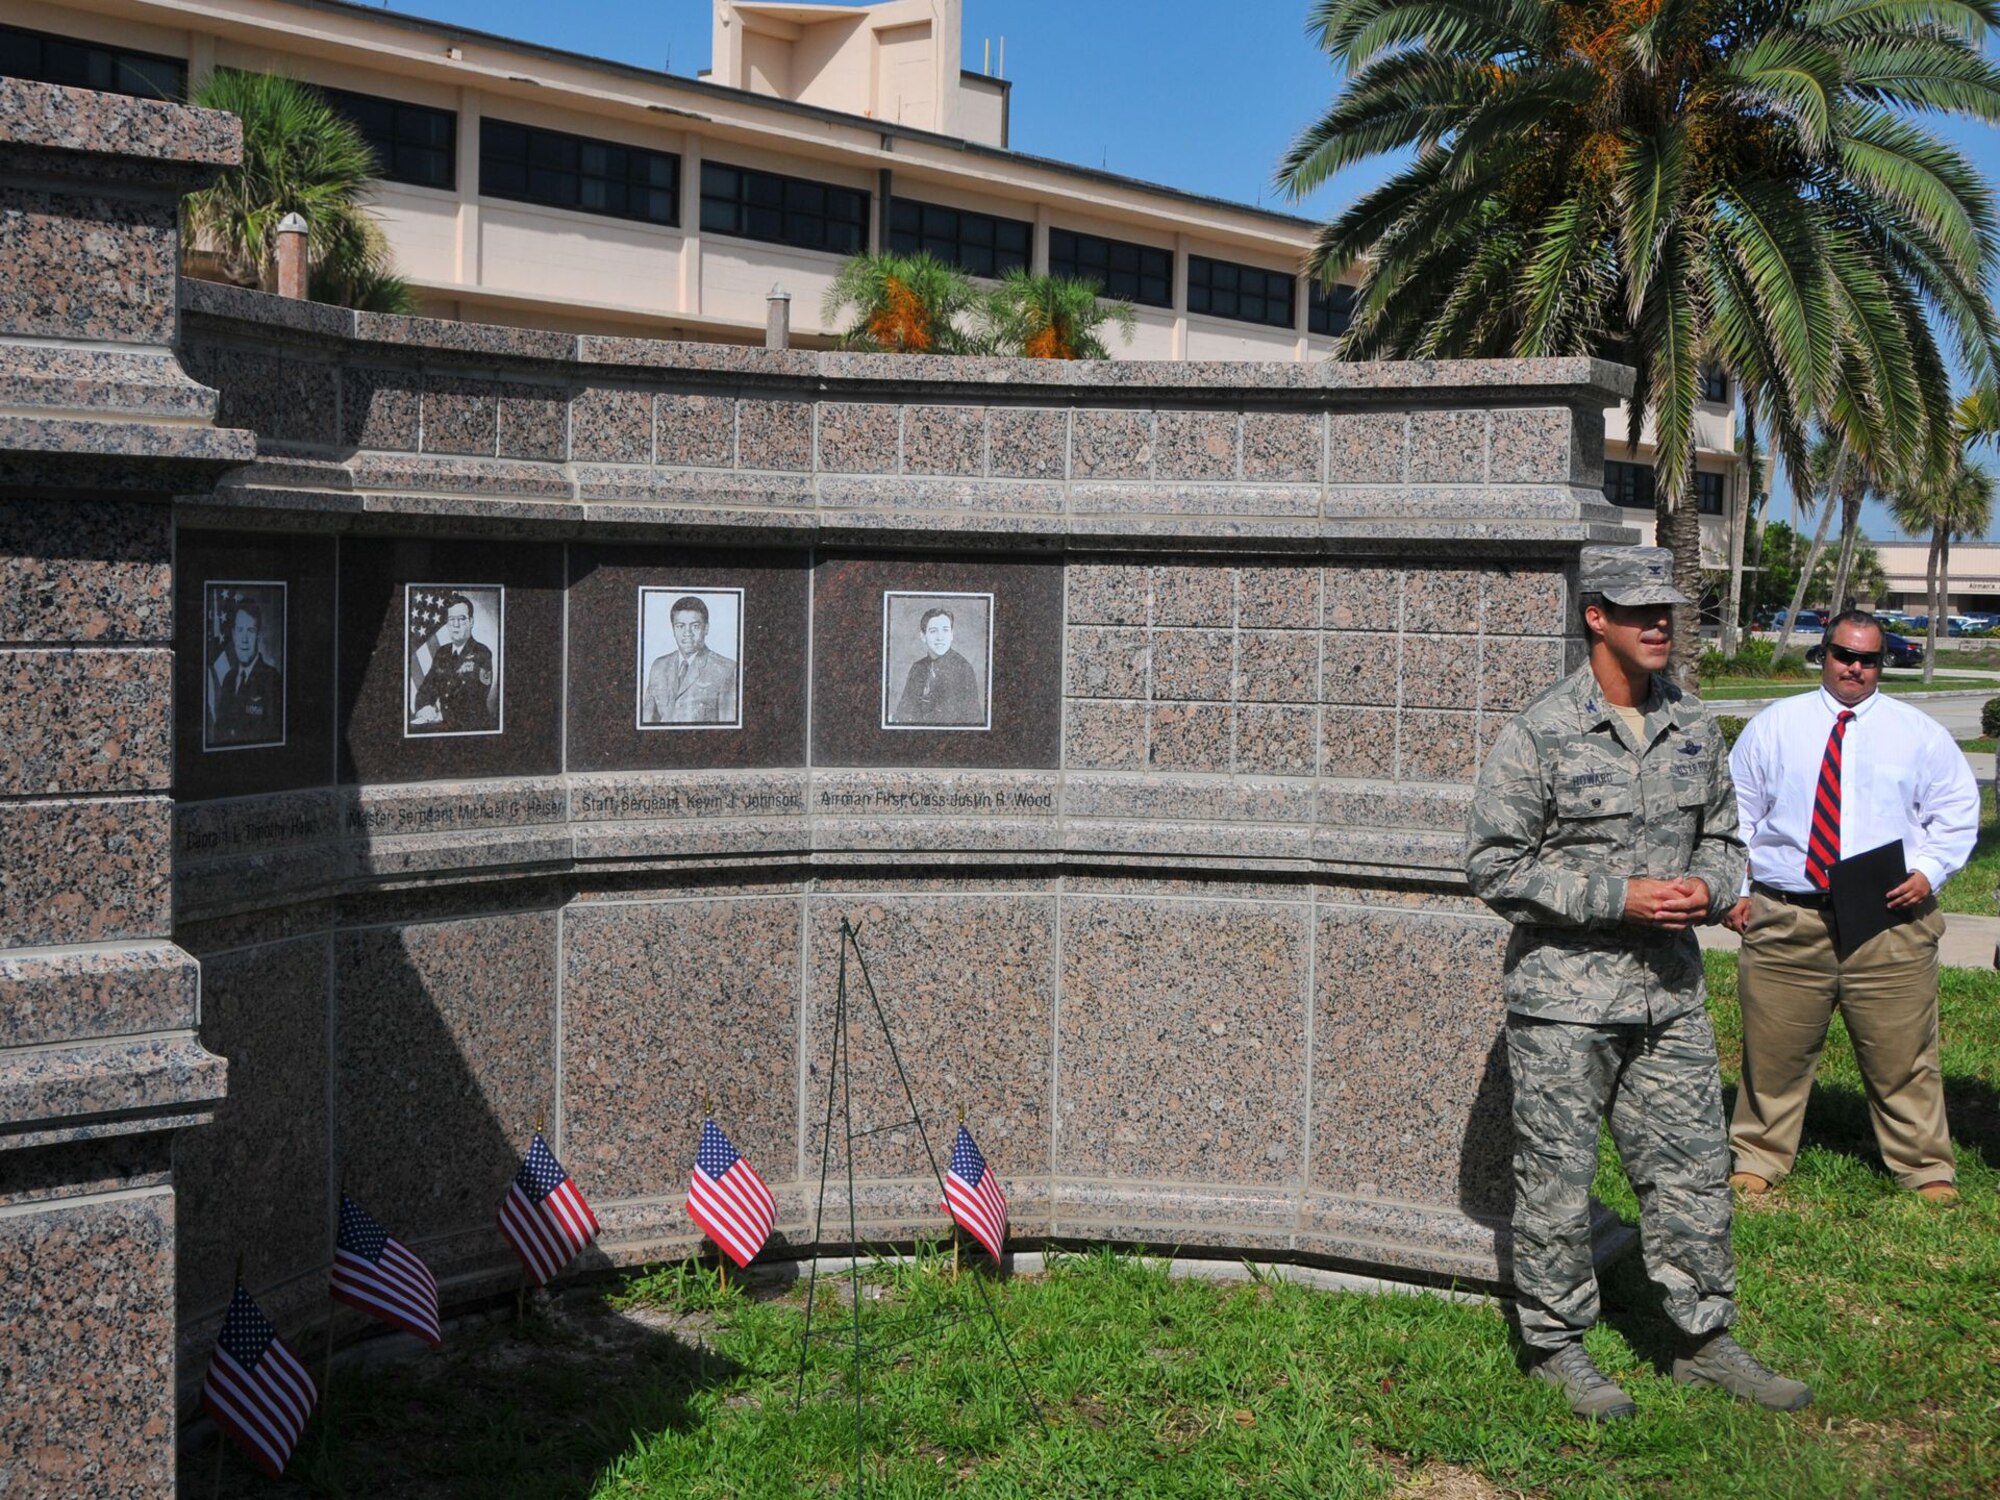 Col. Brett Howard, Vice Wing Commander of the 920th Rescue Wing, speaks at a ceremony held at Memorial Plaza here June 25 to commemorate the 18-year anniversary of a terrorist bombing that claimed the lives of 19 Airmen, including 5 from the rescue family. The bombing took place June 6, 1996 at Khobar Towers, a housing complex at Dhahran Air Base, Saudi Arabia, when a truck bomb exploded outside an 8-story building where Airmen were staying. In addition to the 19 Airmen, nearly 500 people of varied nationalities were wounded. (courtesy photo/Malcolm Denemark-Florida Today)